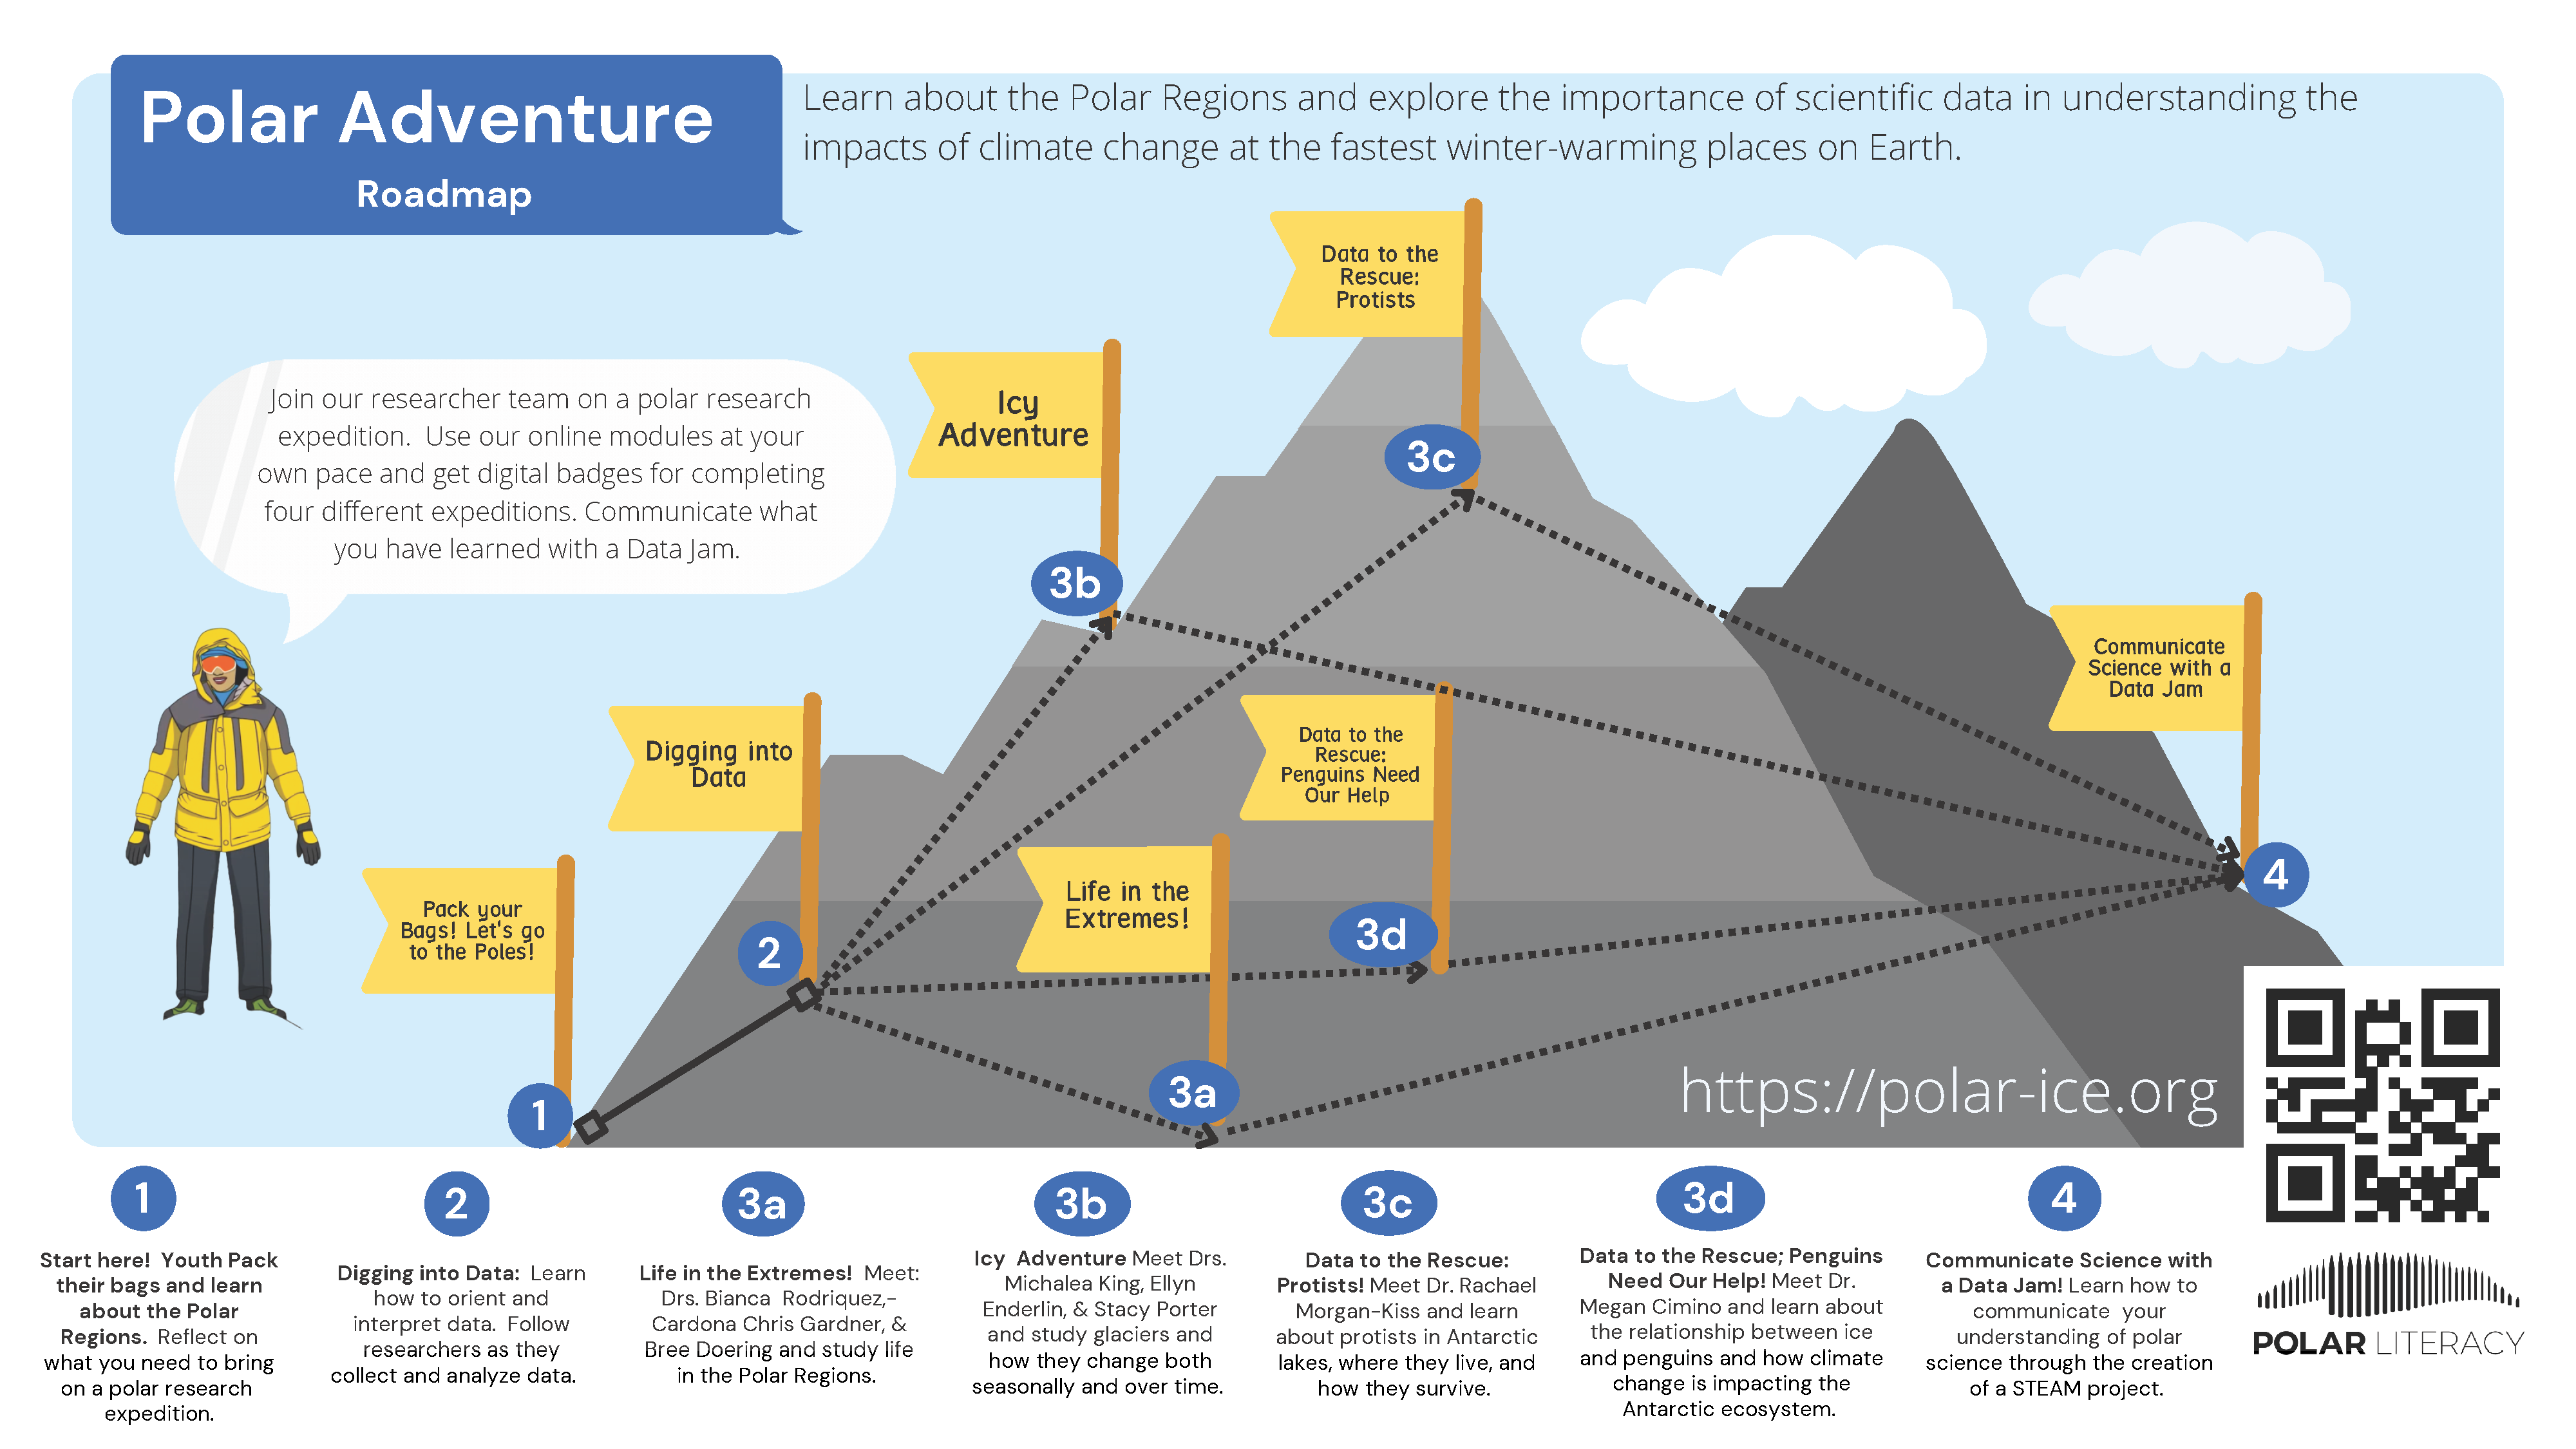 This image depicts the 6 modules in the Polar Explorer Adventure online course.